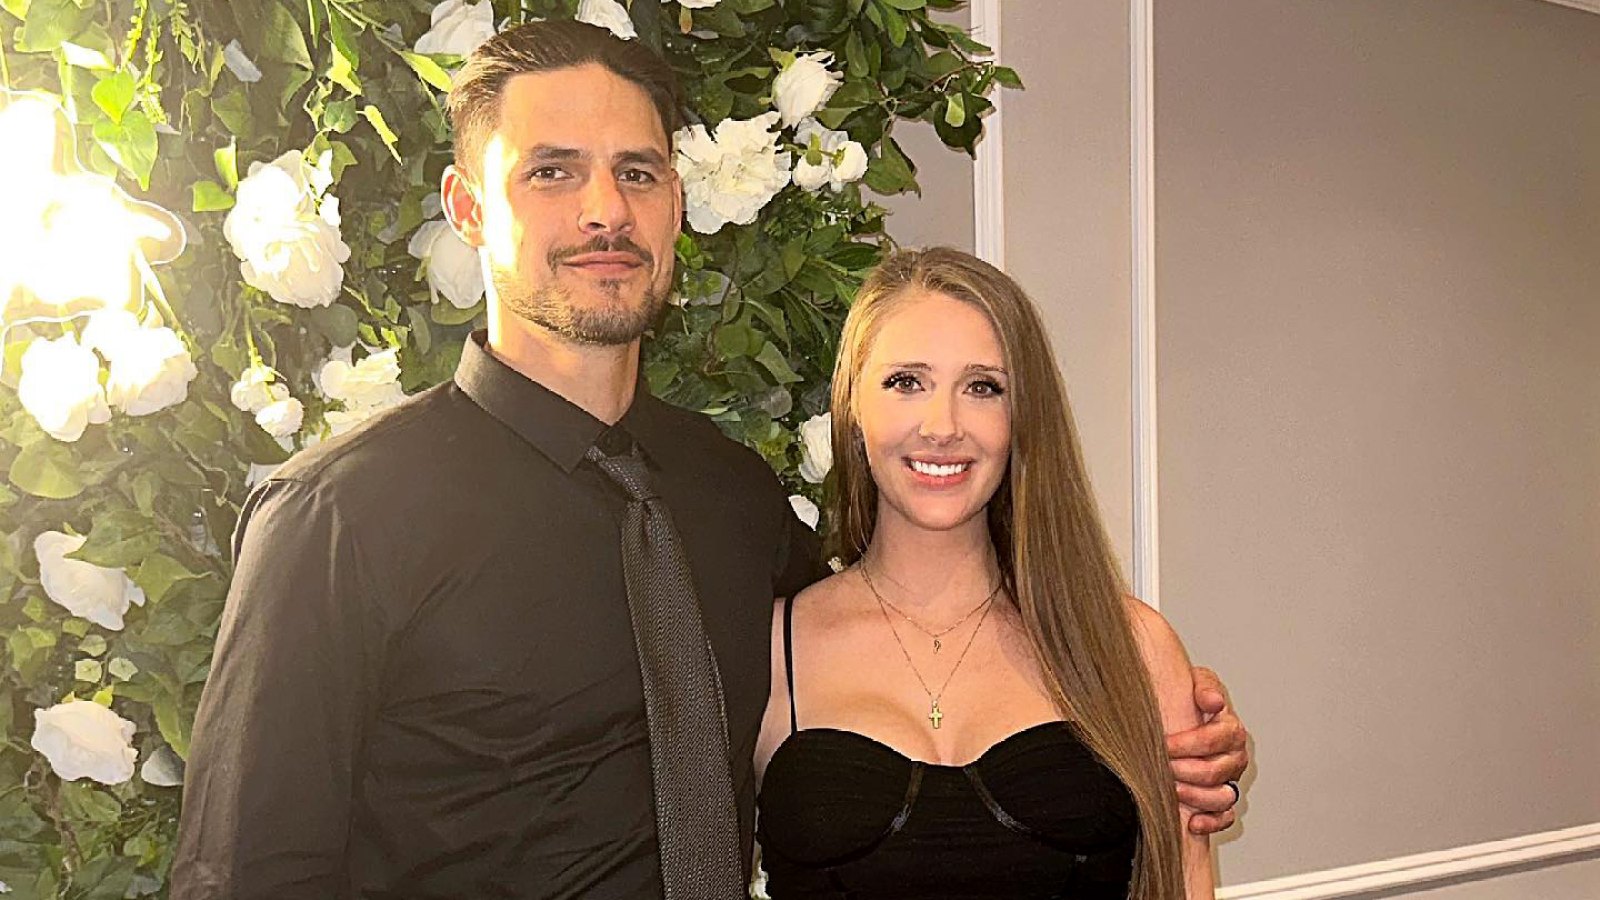 The Challenge’s Jenna Compono and Zach Nichols Welcome Their 3rd Child